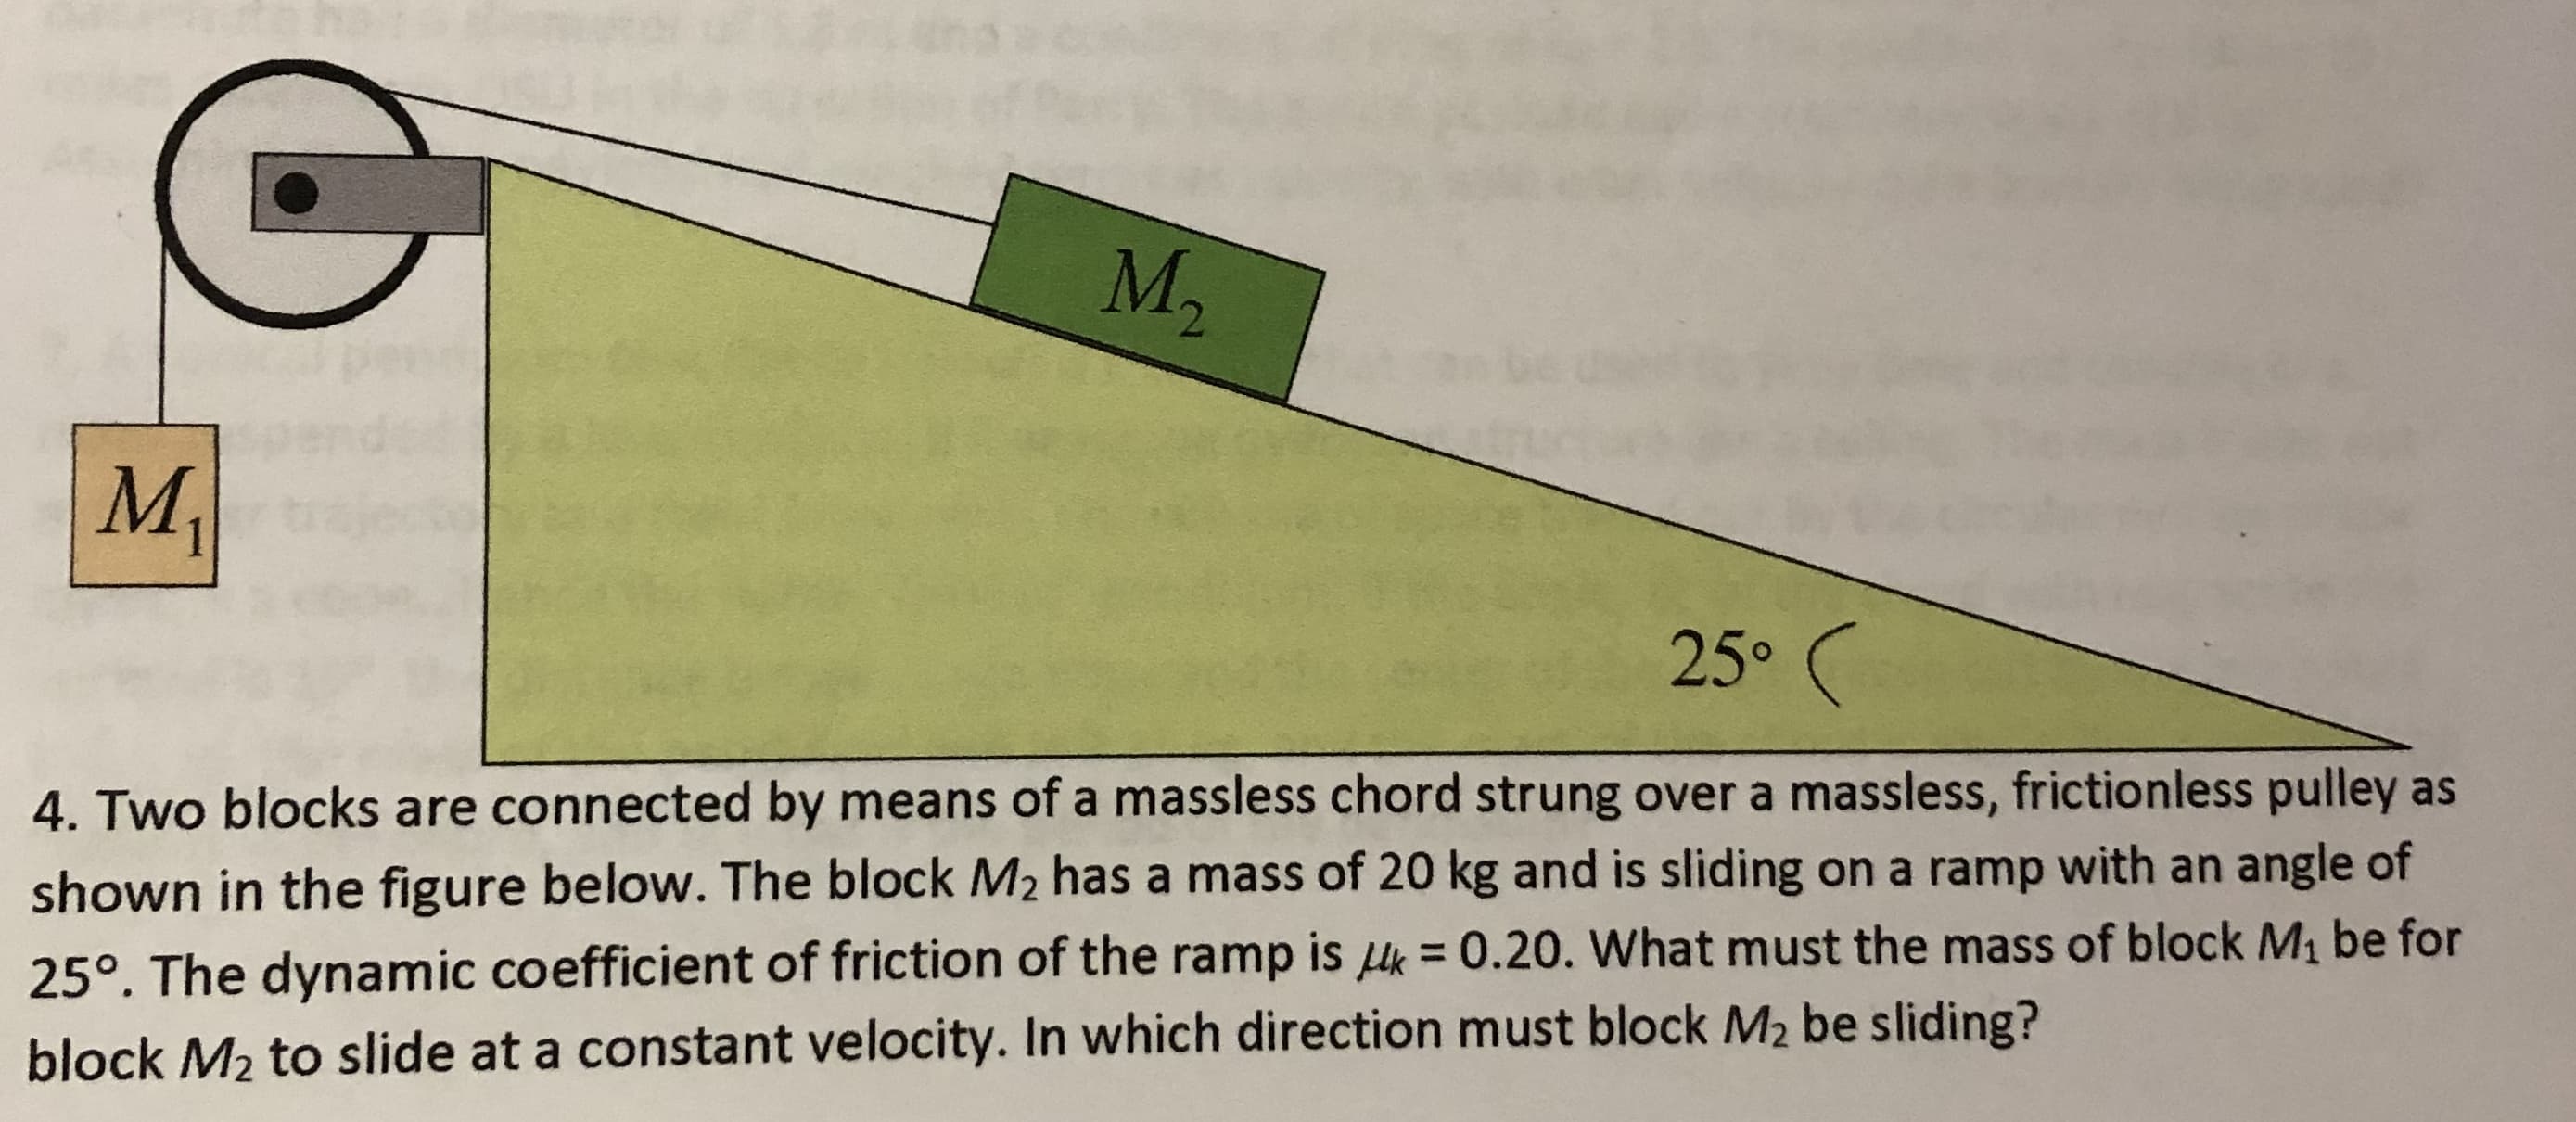 M2
M,
25° (
4. Two blocks are connected by means of a massless chord strung over a massless, frictionless pulley as
shown in the figure below. The block M2 has a mass of 20 kg and is sliding on a ramp with an angle of
%3D
25°. The dynamic coefficient of friction of the ramp is k = 0.20. What must the mass of block M1 be for
block M2 to slide at a constant velocity. In which direction must block M2 be sliding?
